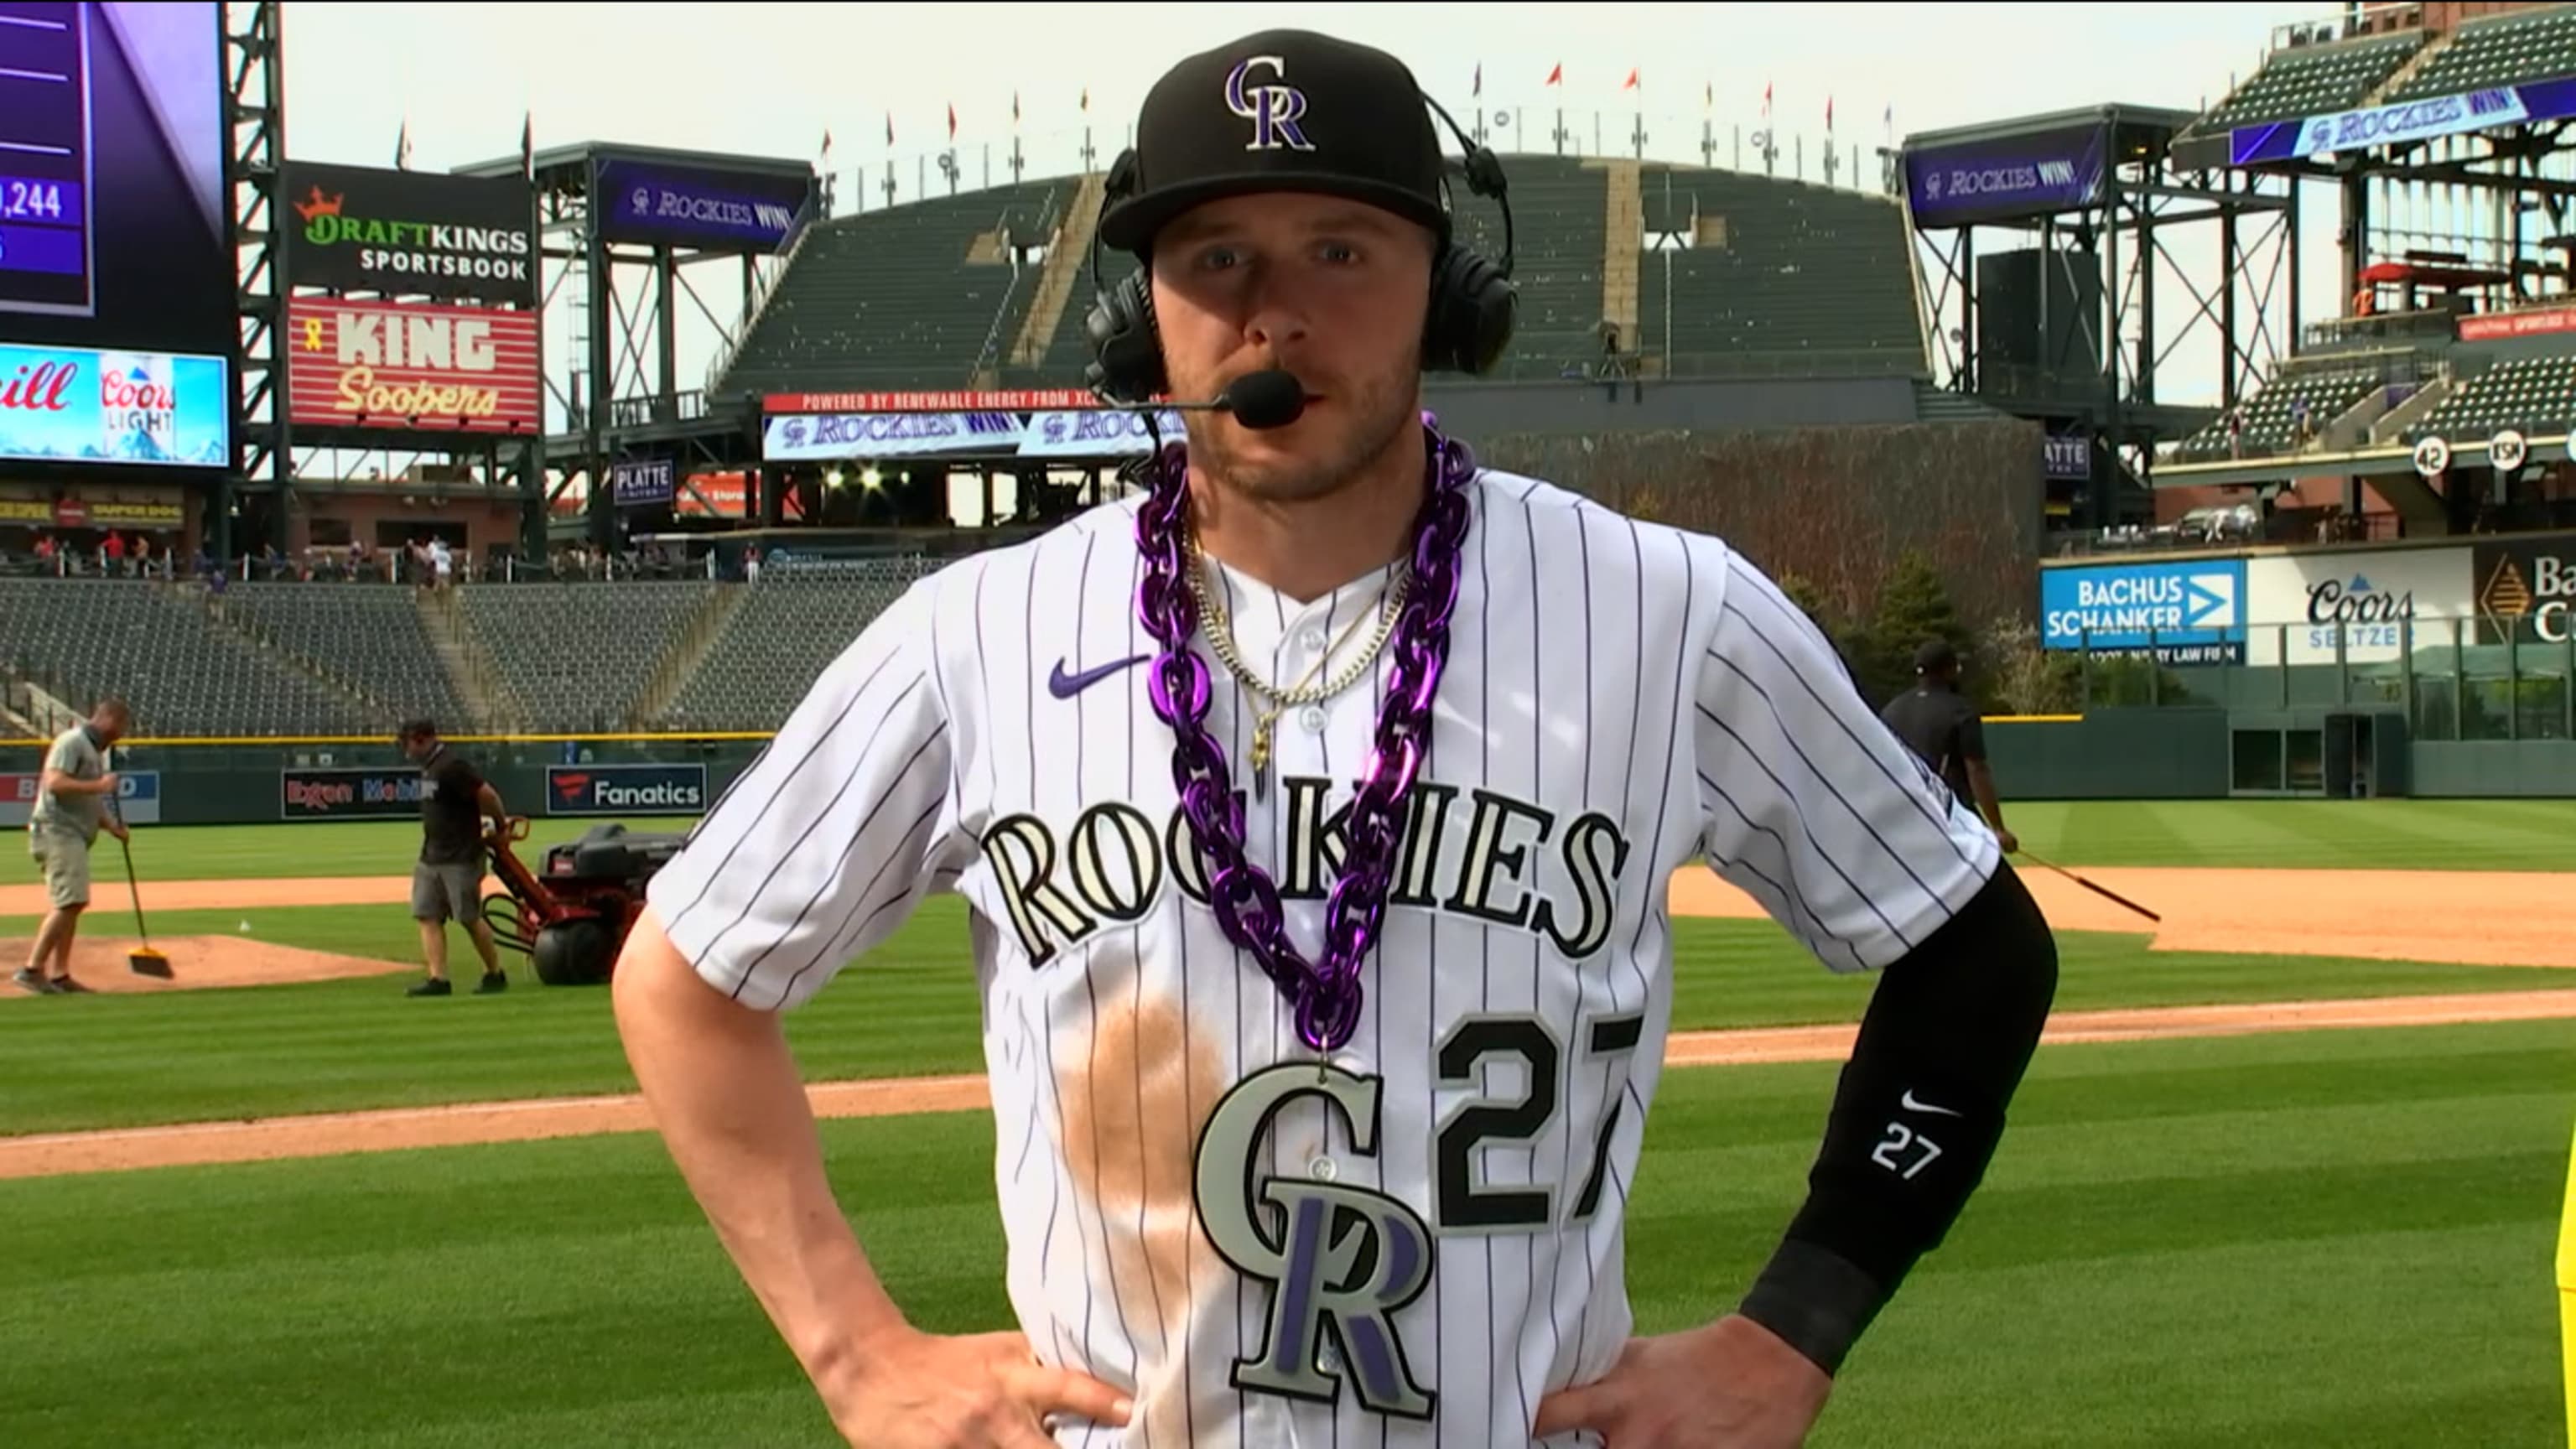 Trevor Story will make his season debut tomorrow against the